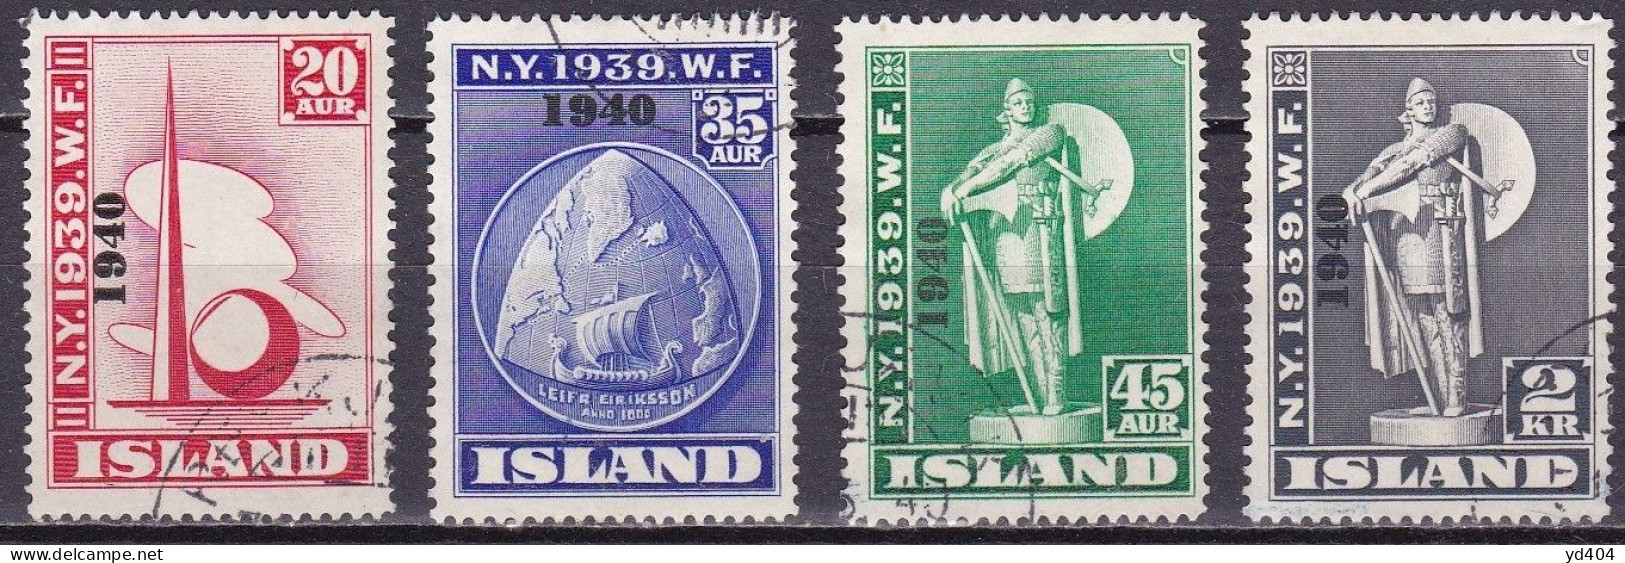 IS041 – ISLANDE – ICELAND – 1940 – NEW-YORK WORLD FAIR OVERP.– SG # 257/60 USED 680 € - Used Stamps